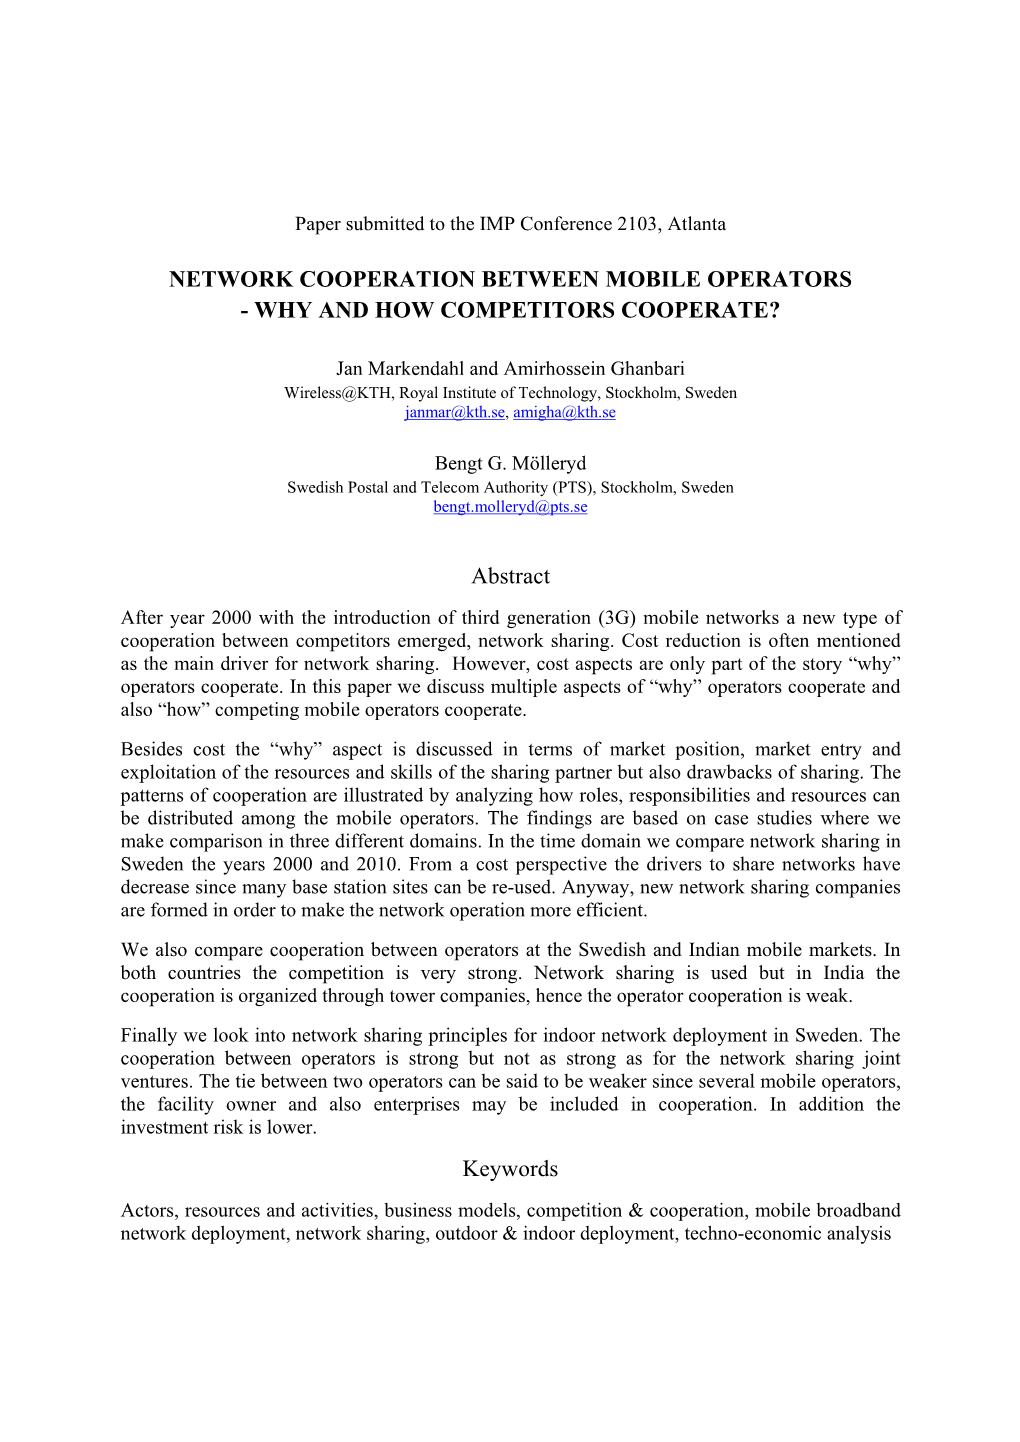 Network Cooperation Between Mobile Operators - Why and How Competitors Cooperate?